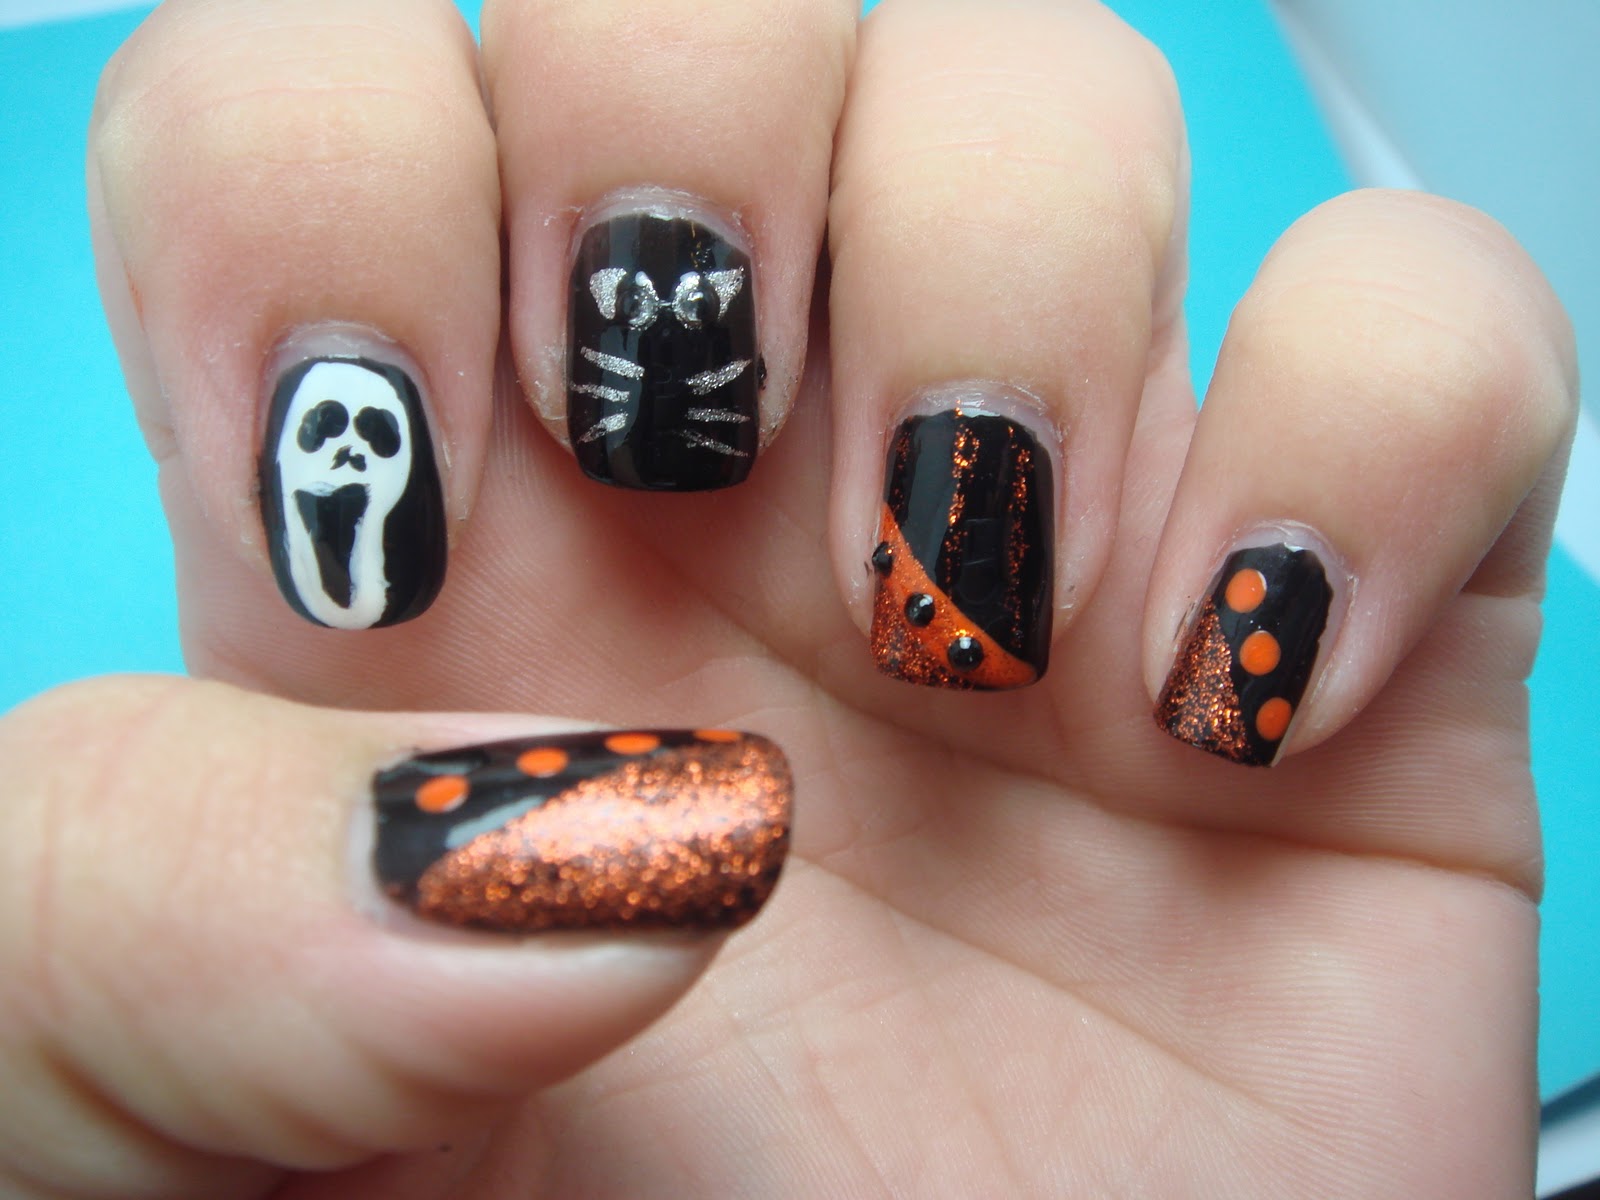 3. Quick and Easy Nail Designs with Nail Polish - wide 6